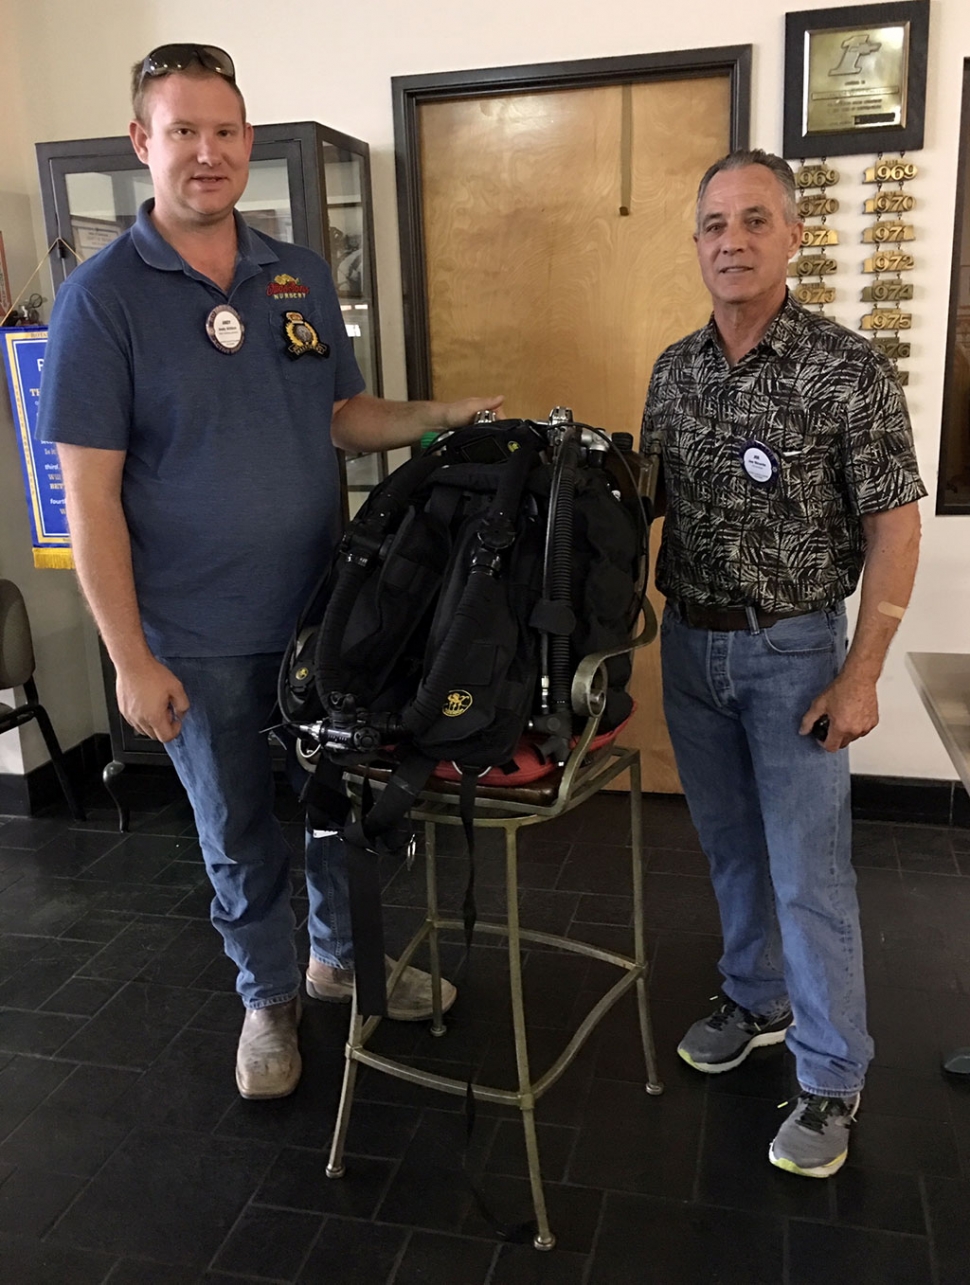 Pictured is Rotary President Andy Klittich with Rotary Member Joe Ricards who presented to the club about being a certified scuba instructor in several specific areas. He brought along his most recent equipment, a rebreather which allows him to stay underwater for up to three hours at 130 feet. He described his dives and places he has gone, and his passion for the sport. Photo courtesy Martha Richardson.